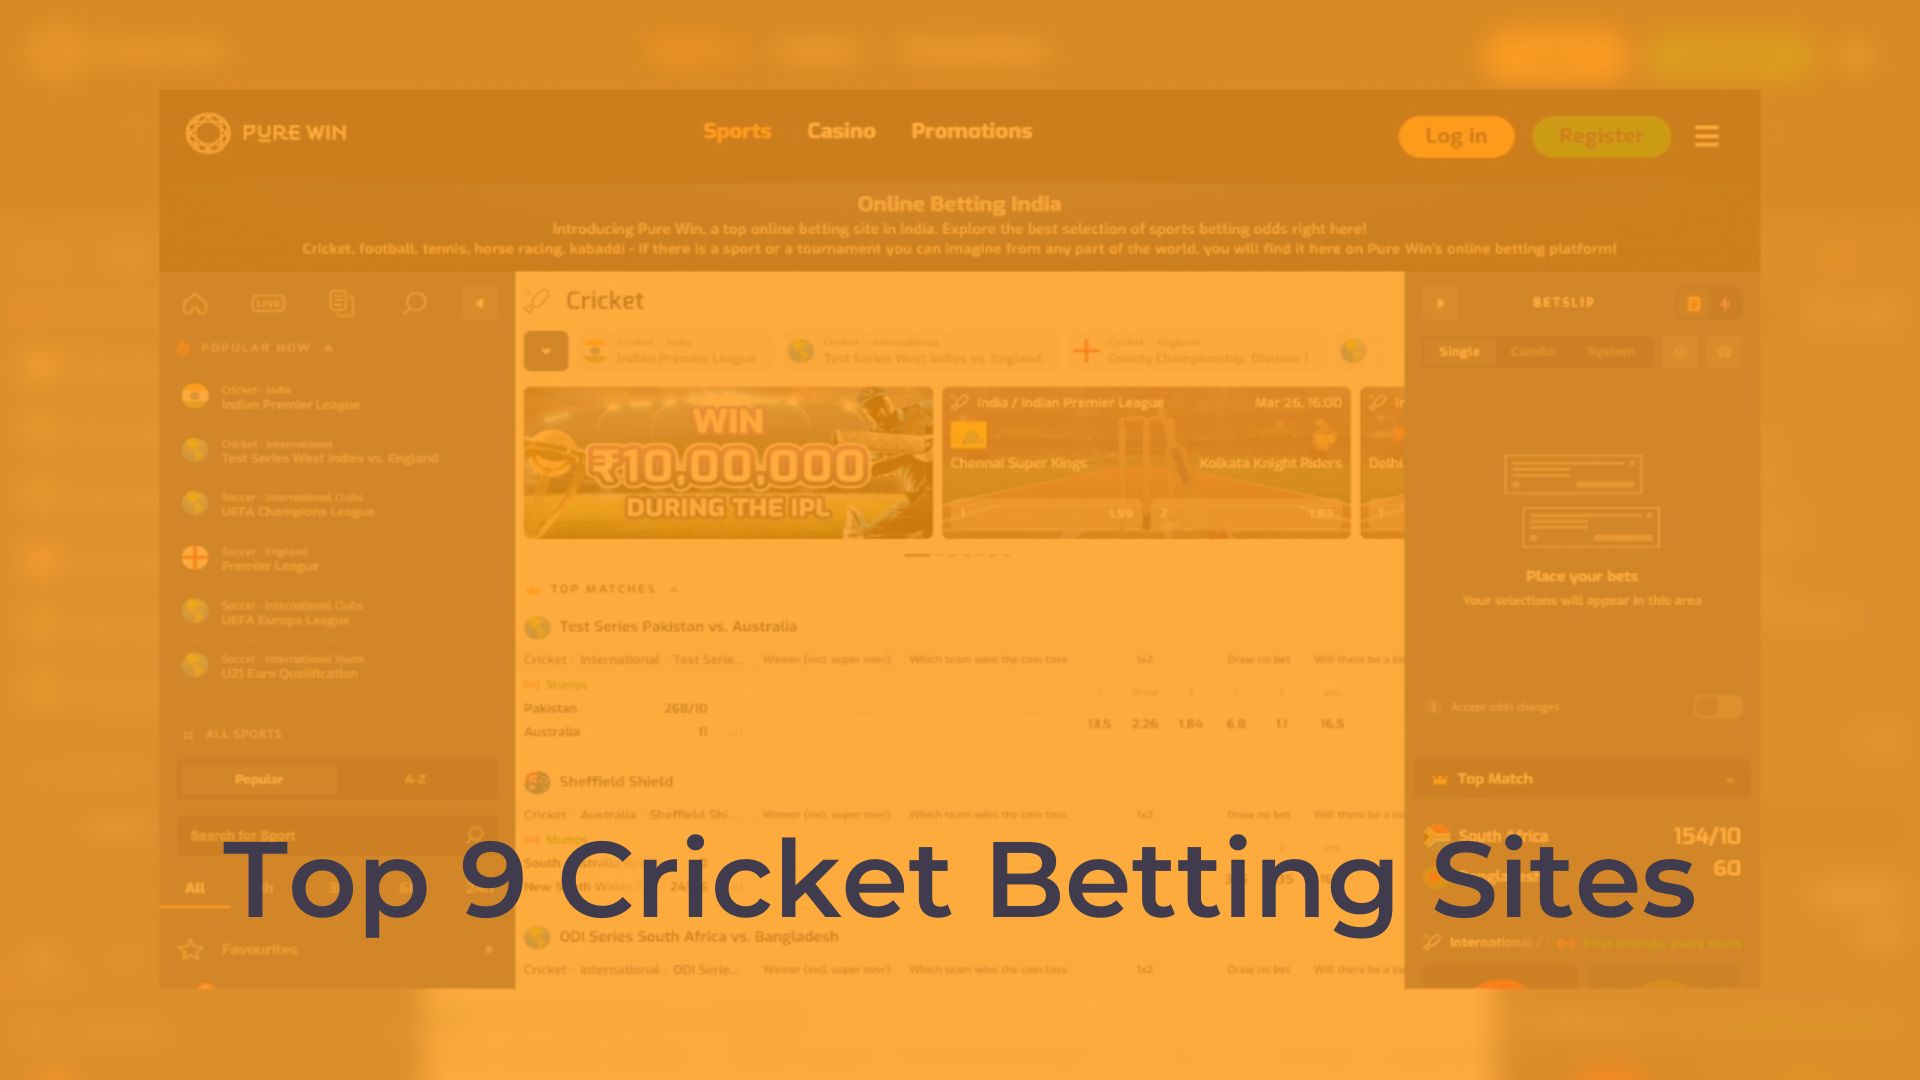 Guide to the Top 9 Cricket Betting Sites